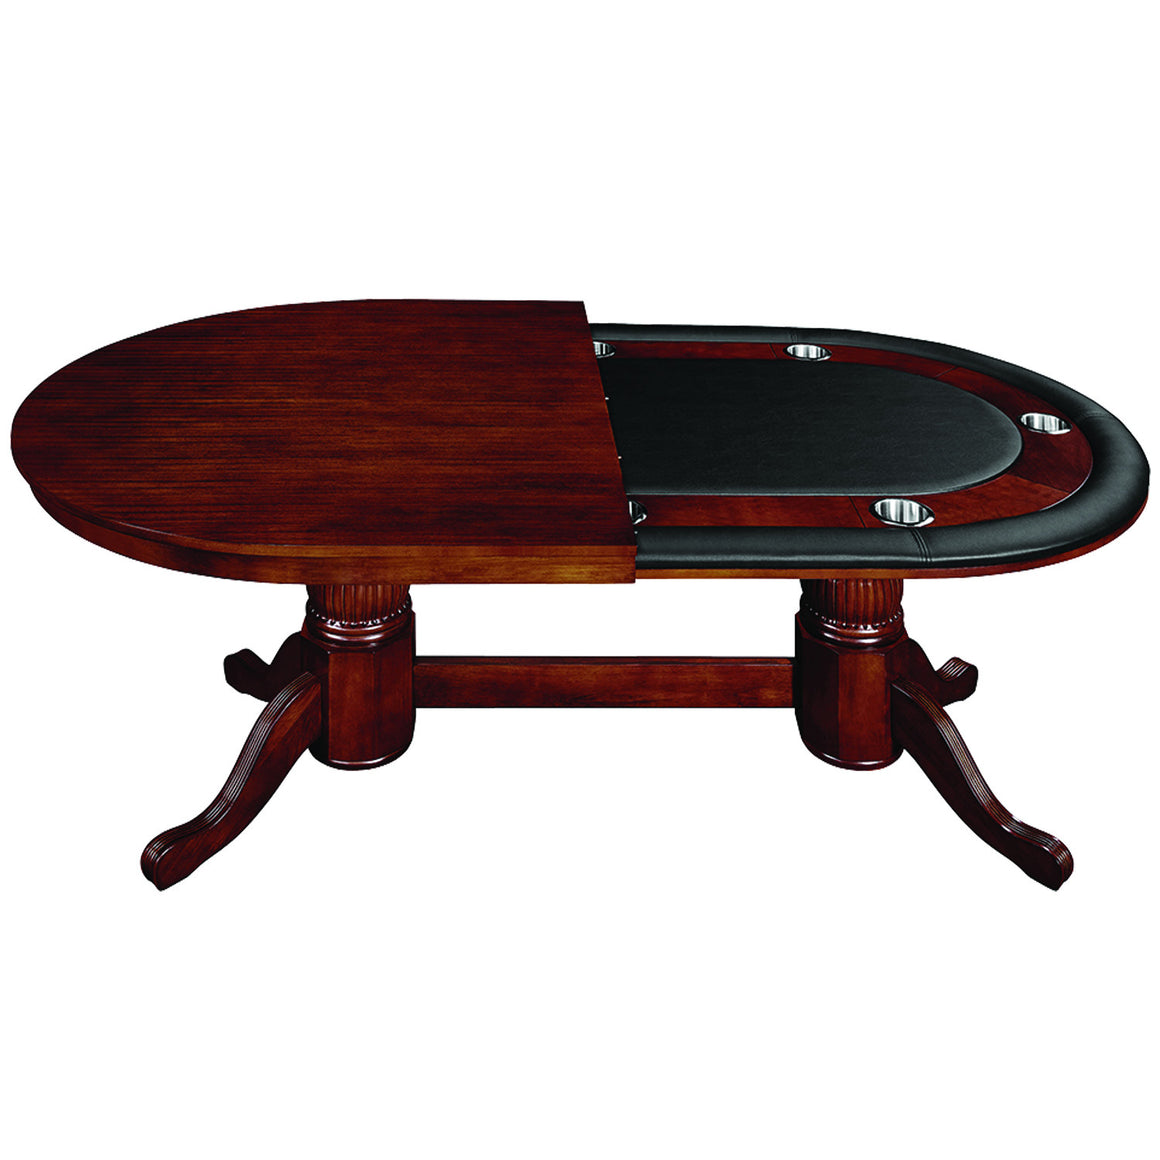 84" Texas Hold'em Poker and Game Table Dining Top - English Tudor Finish - Man Cave Boutique